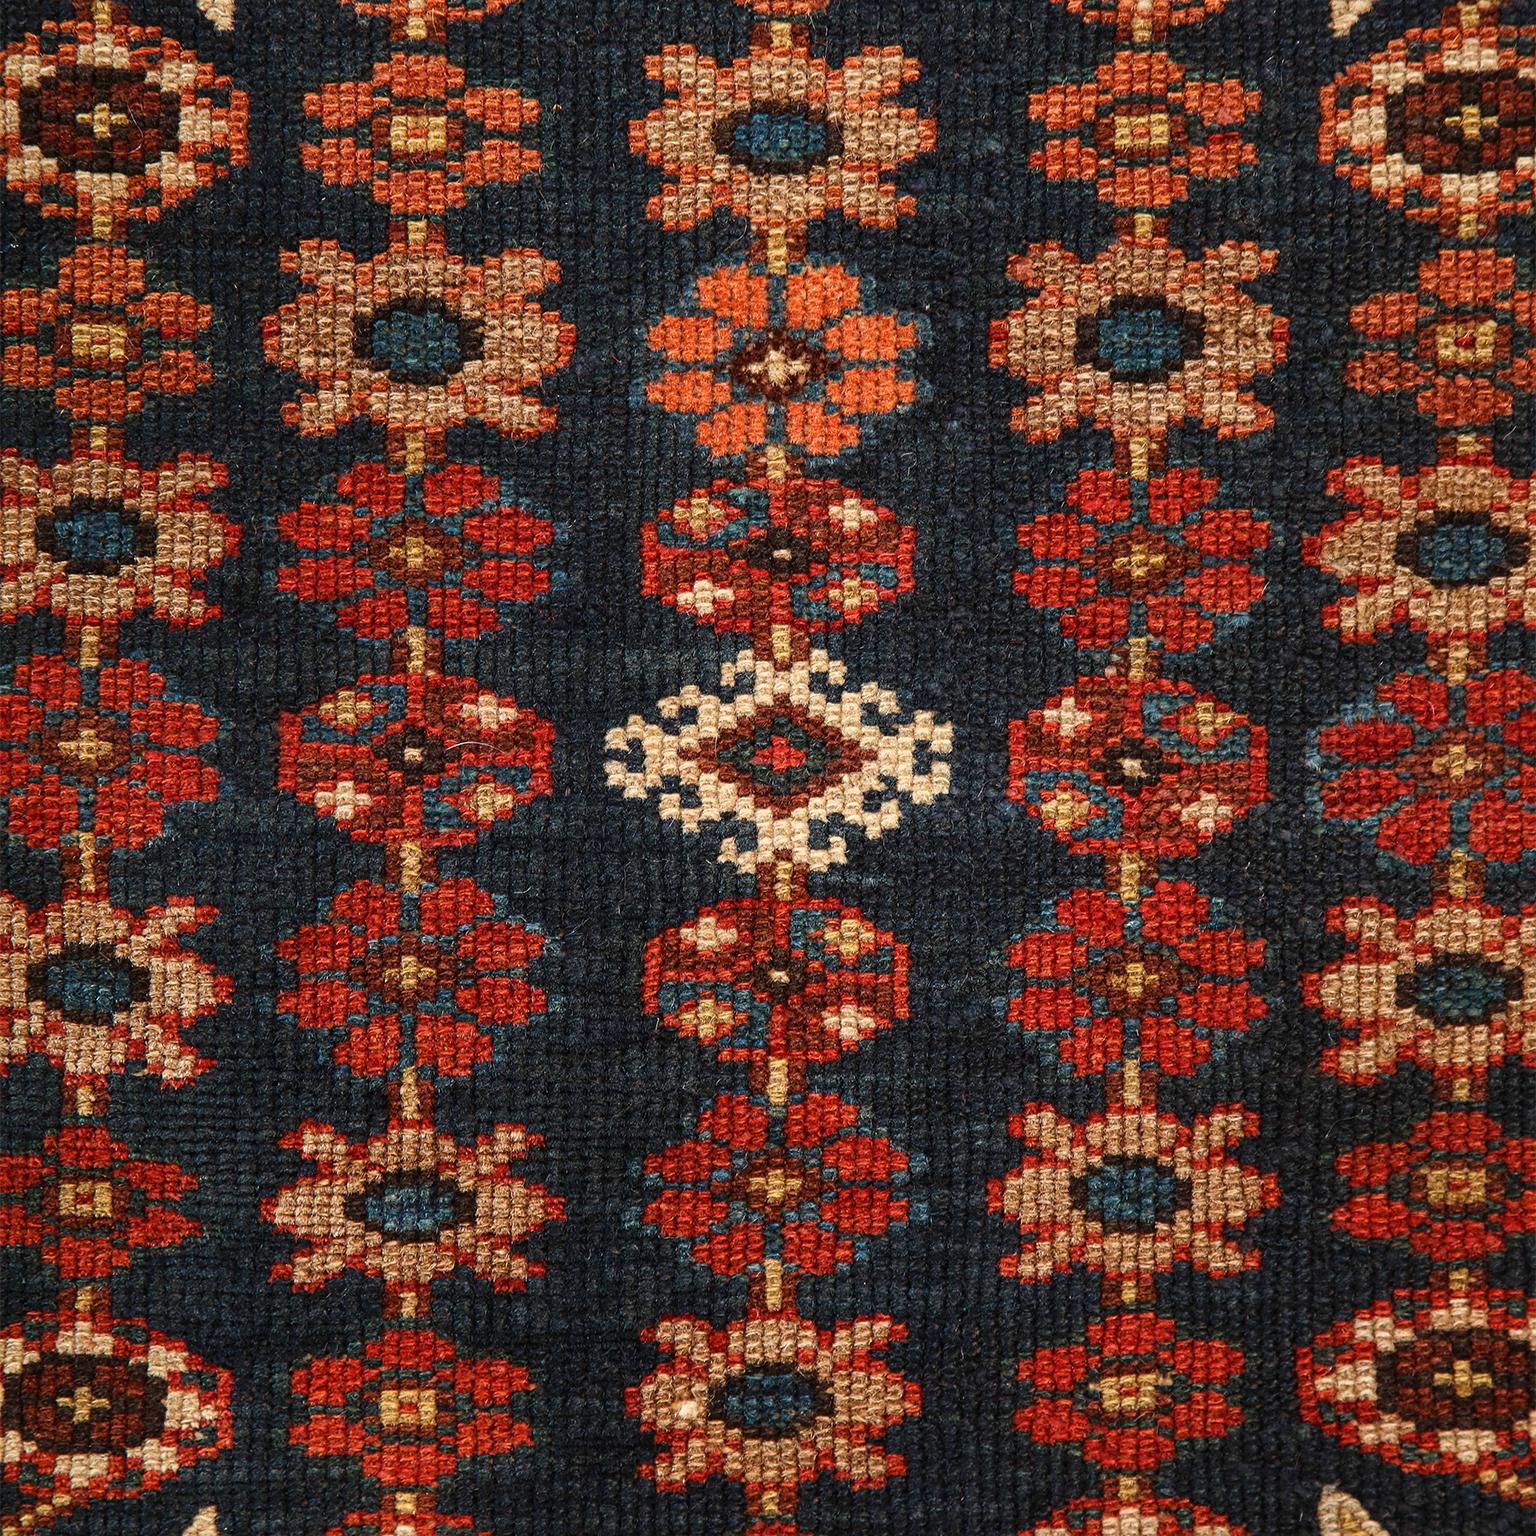 Antique 1920s Wool Persian Mazlaghan Rug, 4' x 6' For Sale 3